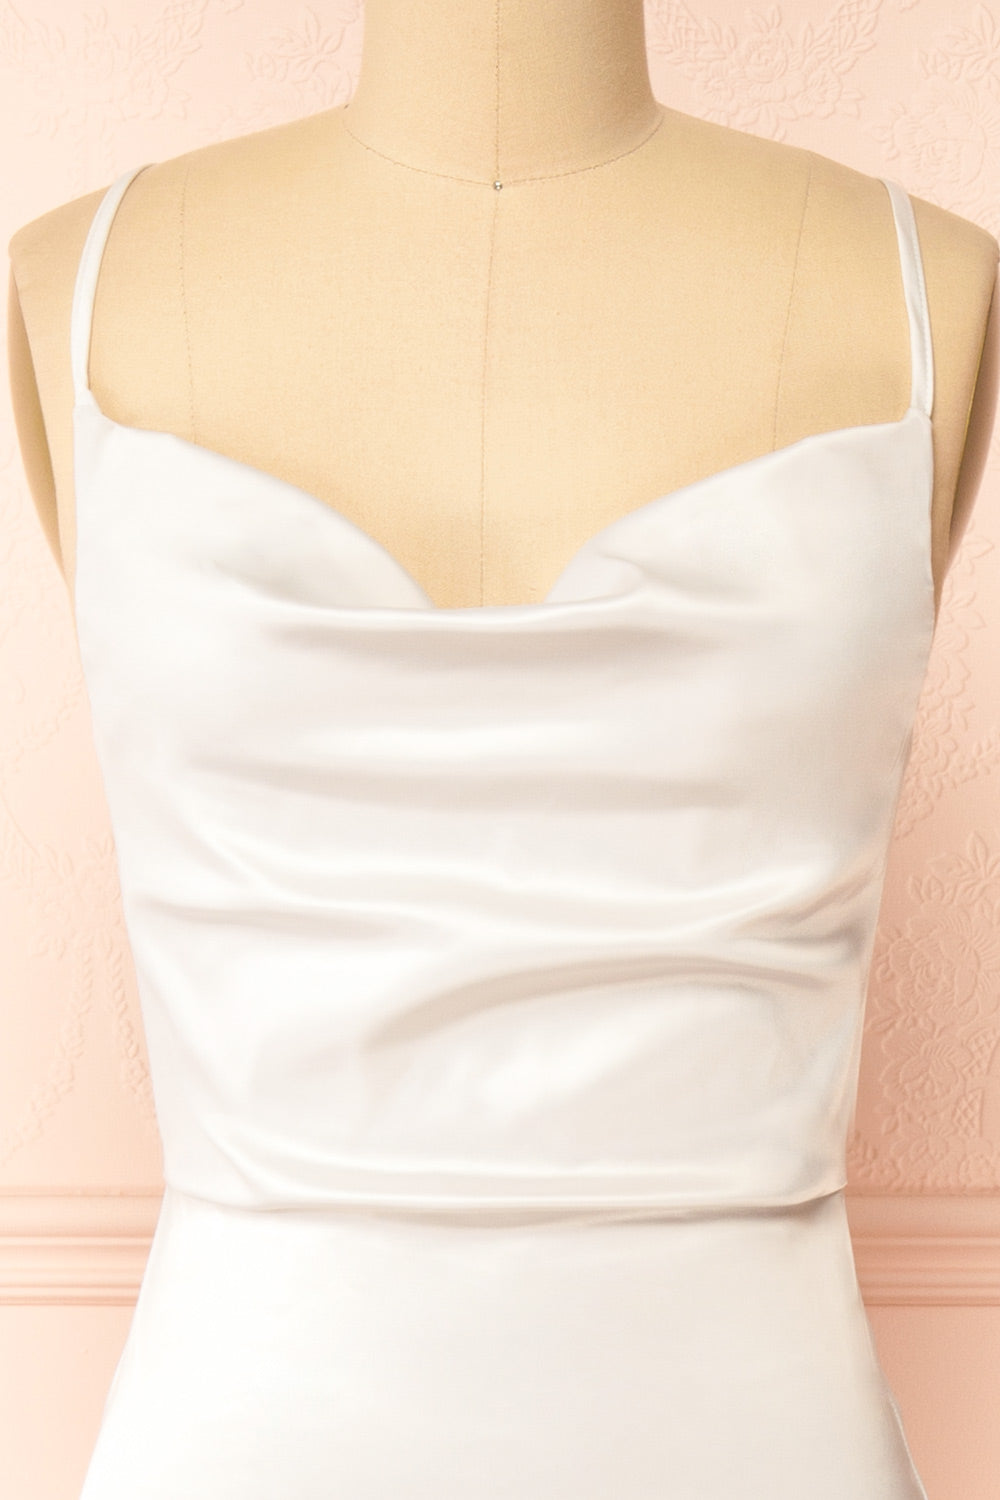 Alexia Ivory Long Satin Mermaid Dress w/ Cowl Neck | Boutique 1861 front tuck in